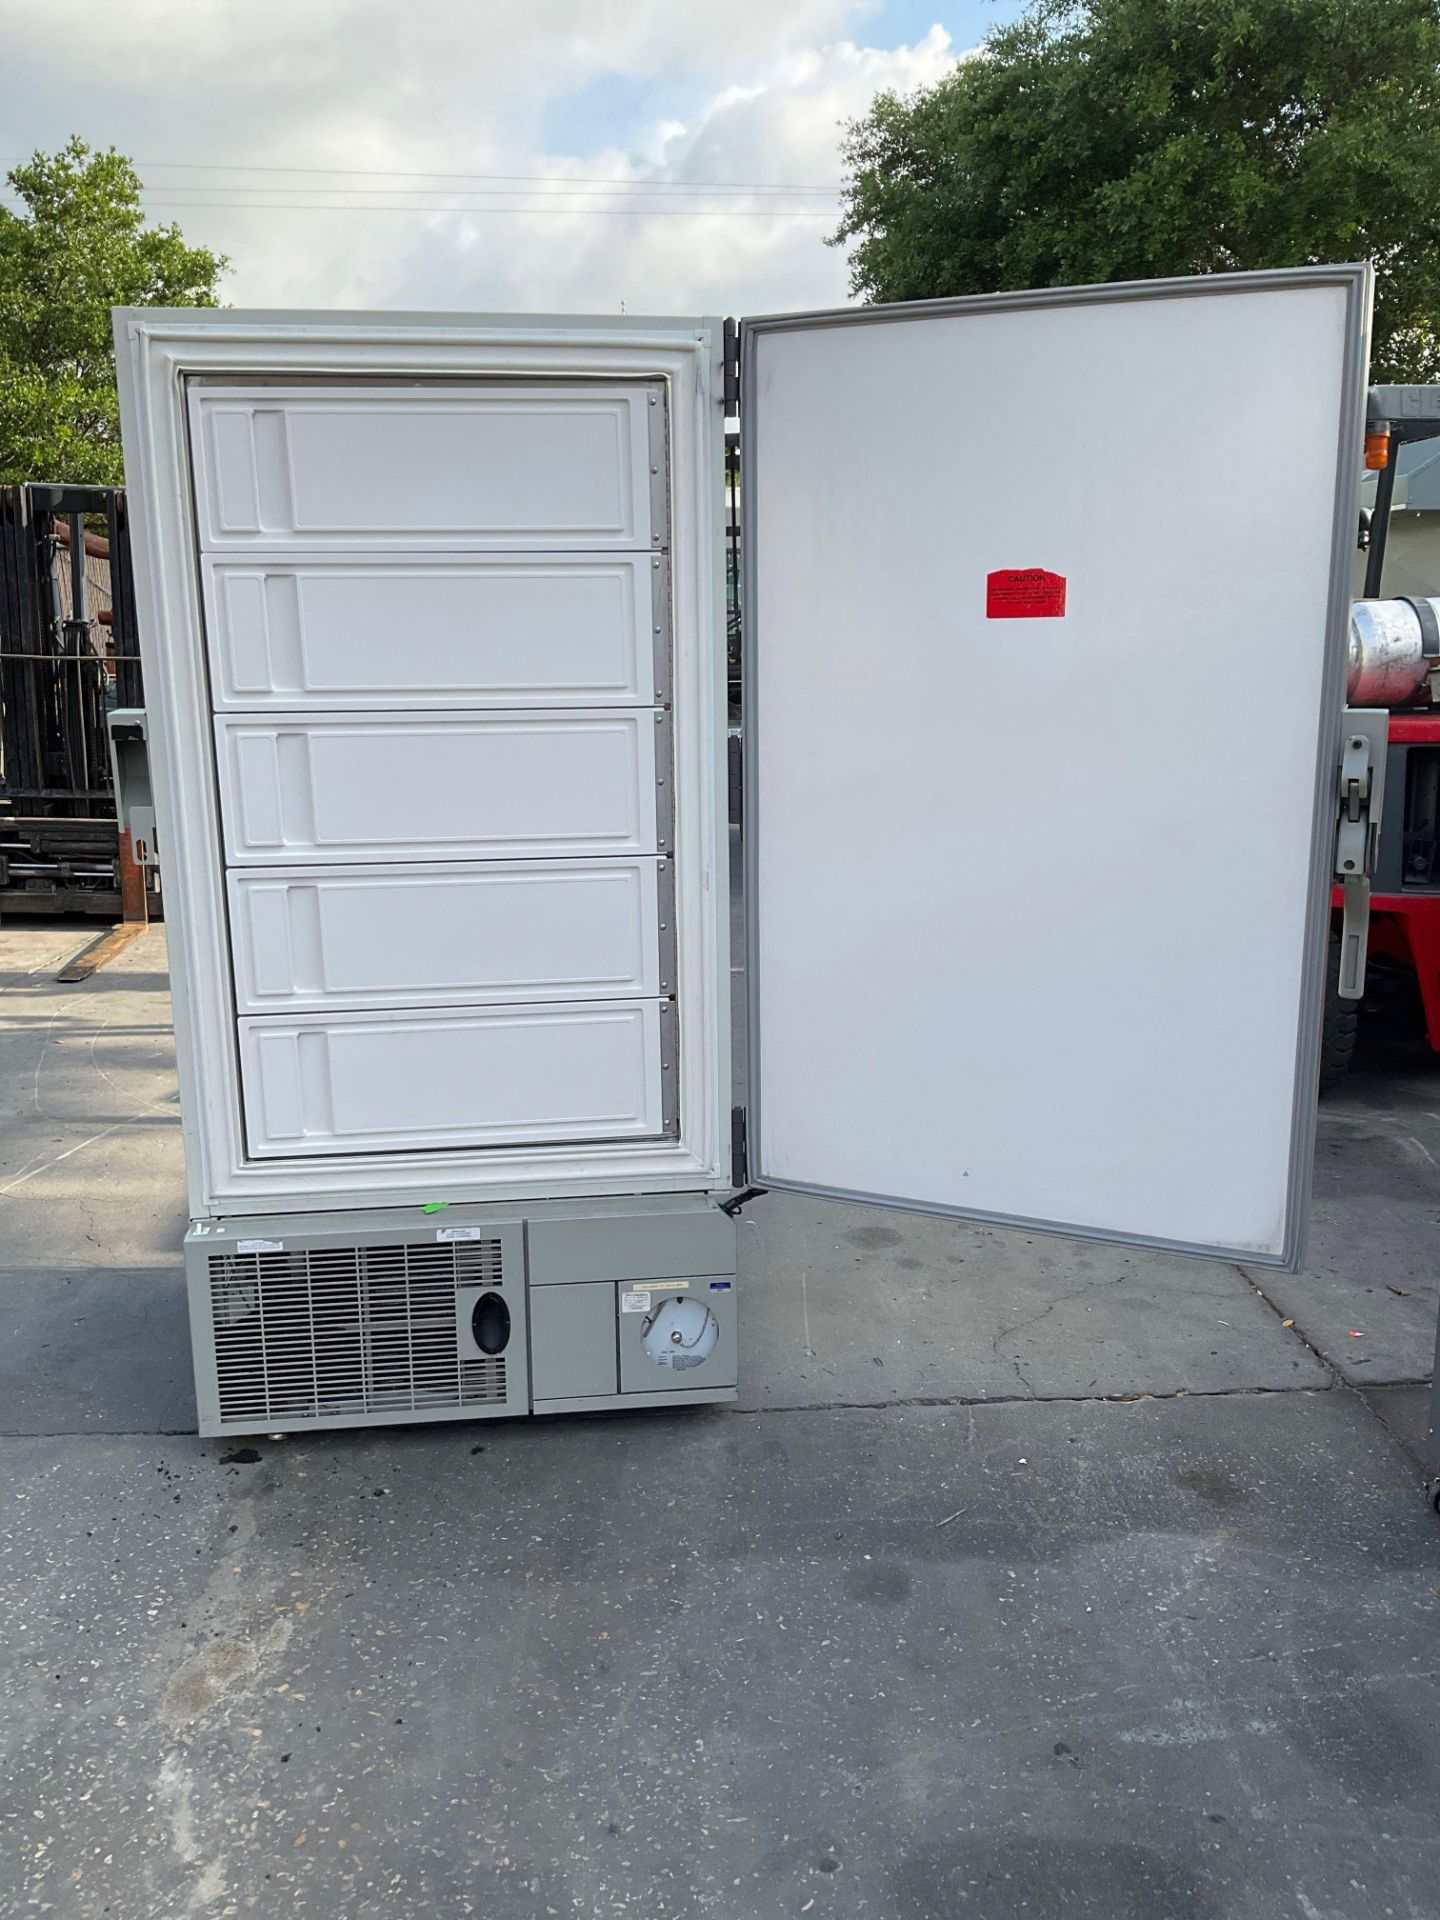 THERMO ELECTRON CORPORATION FREEZER MODEL ULT2186-9-D40, 208/230 VOLTS, 10 AMPS, 60 HZ, 1 PHASE,APPR - Image 10 of 11